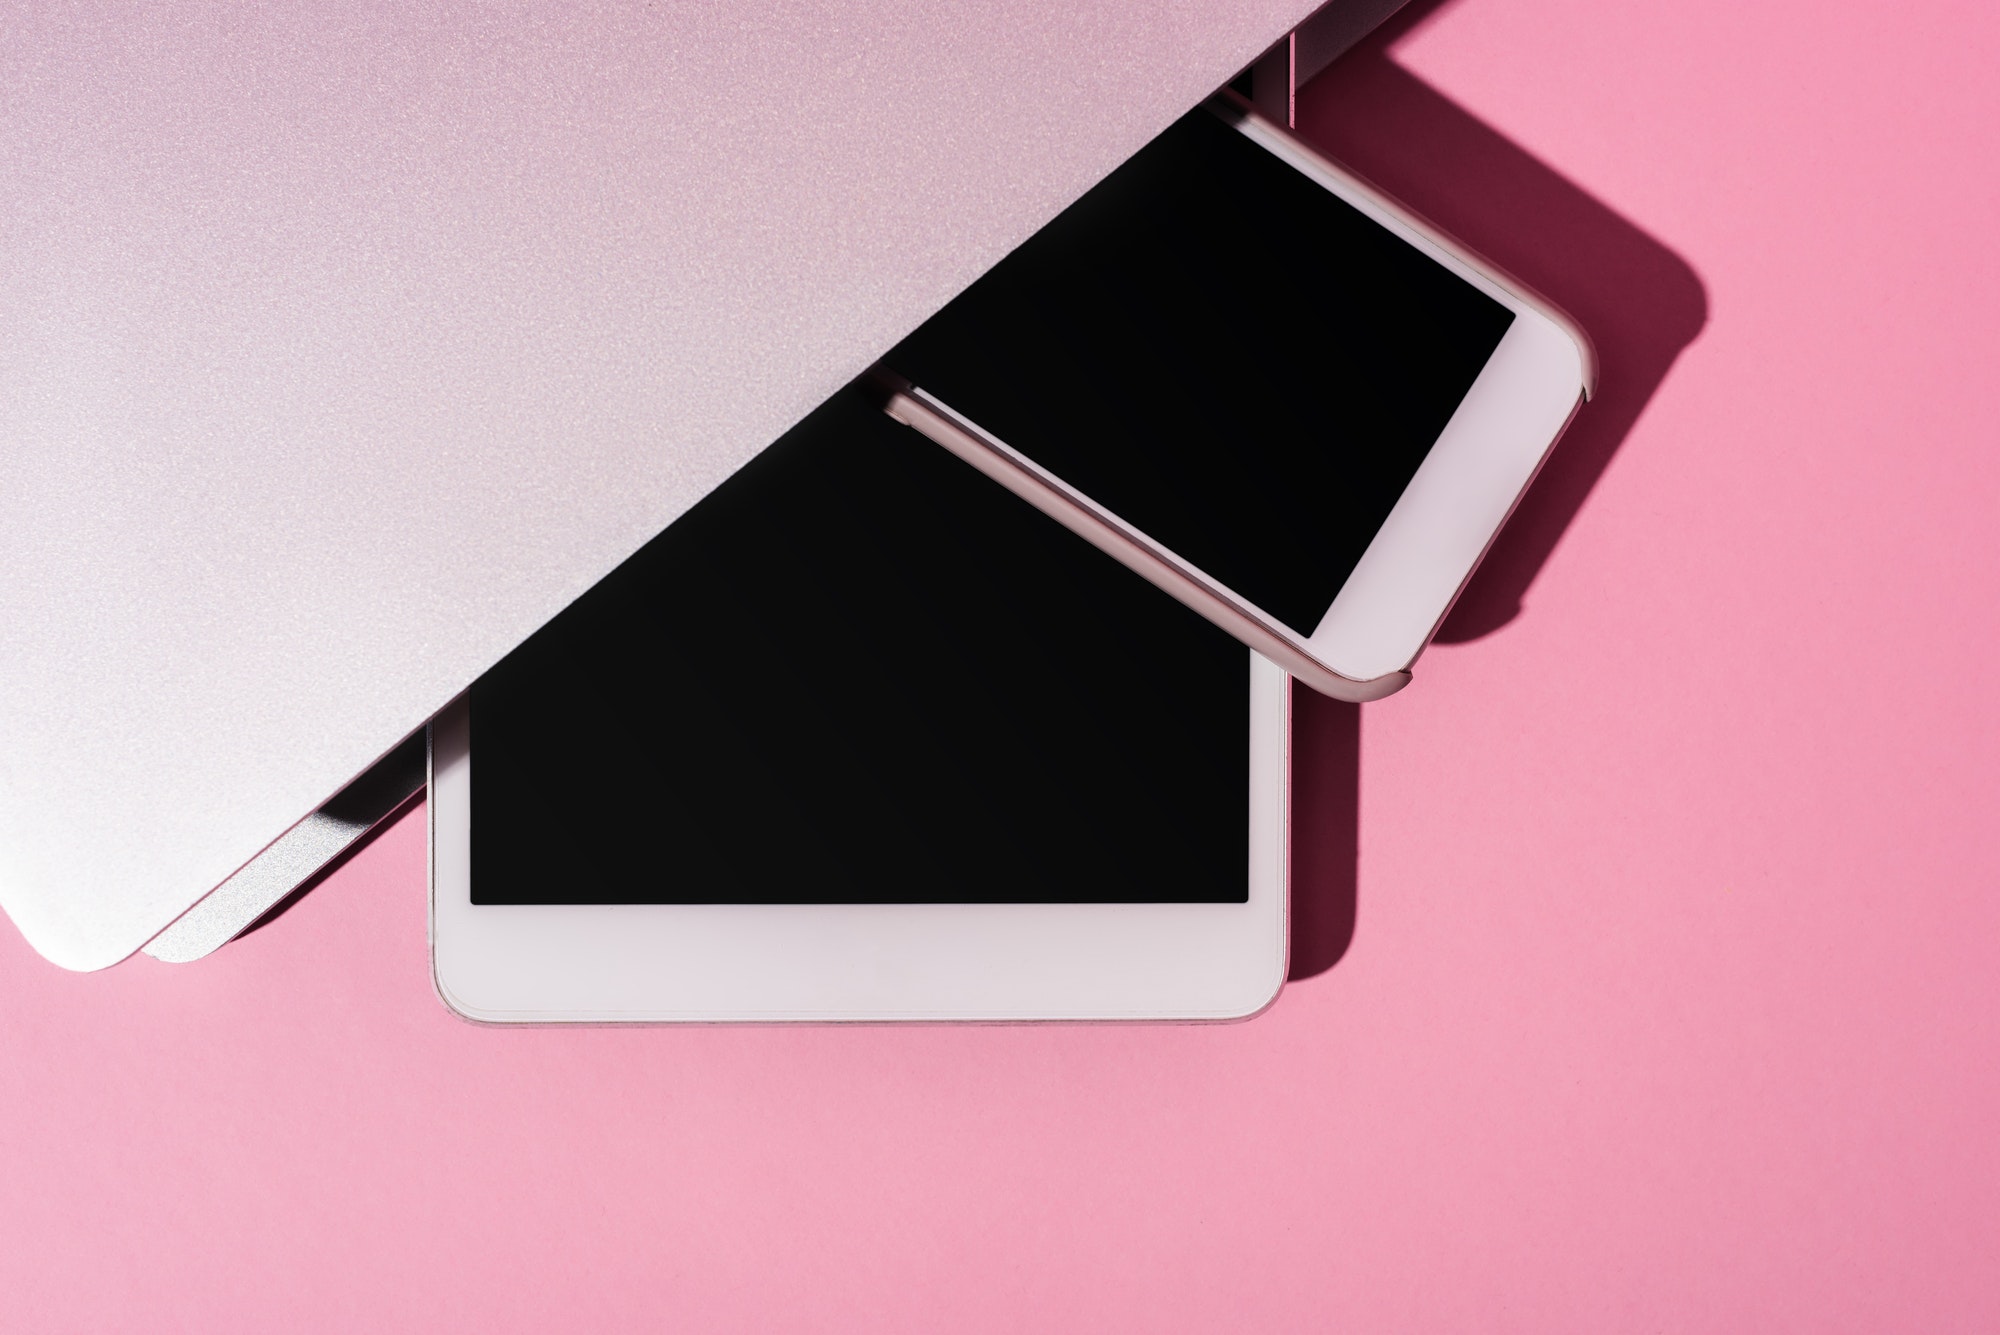 Top View of Gadgets on Pink Background